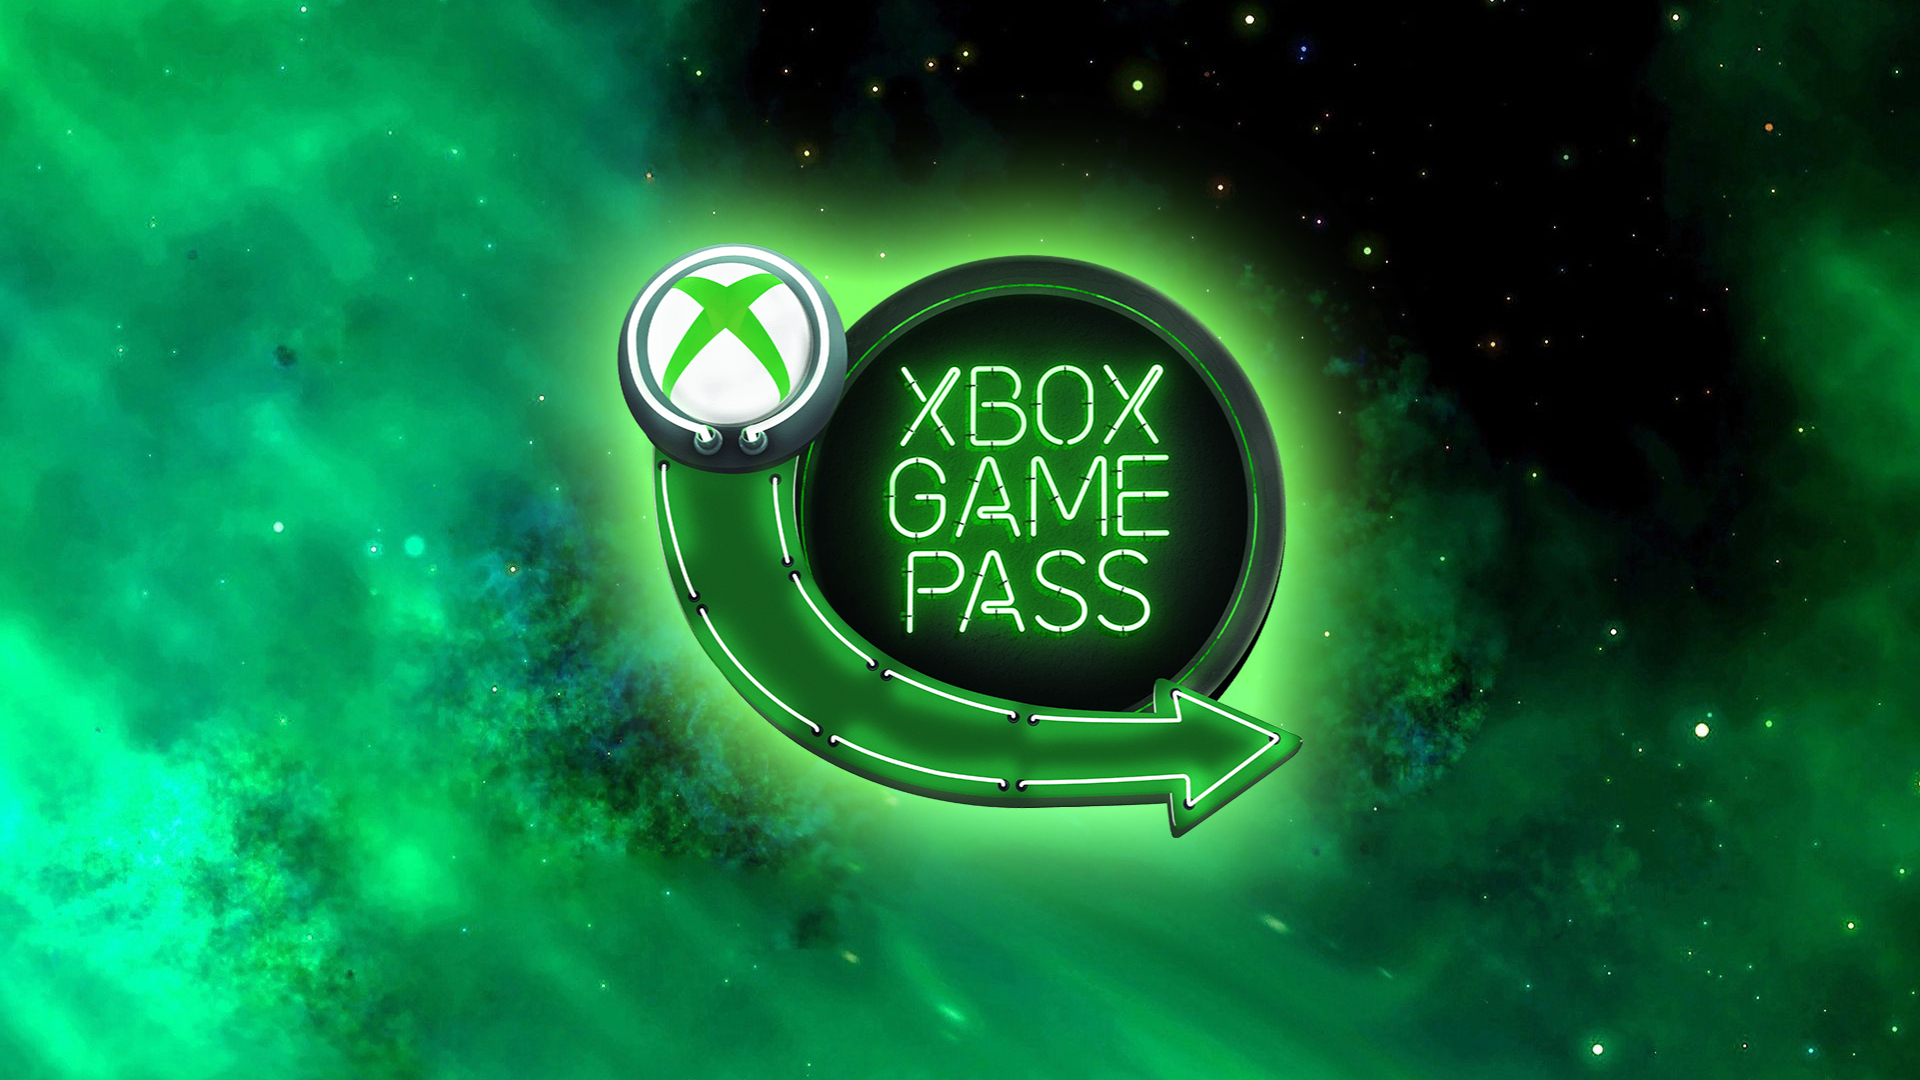 Forza Motorsport, Gotham Knights and more land on Game Pass in October